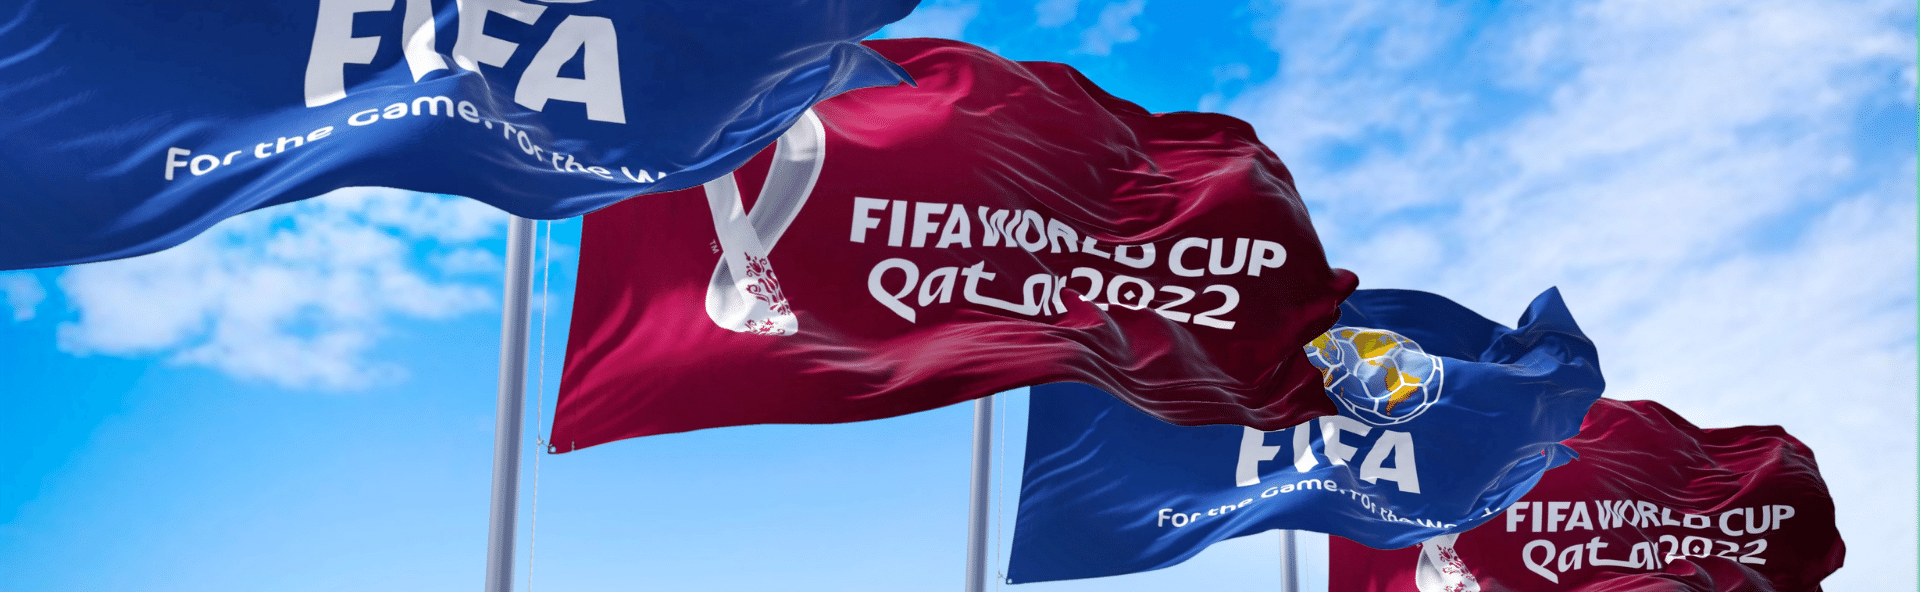 Image of Qatar FIFA World Cup Flags